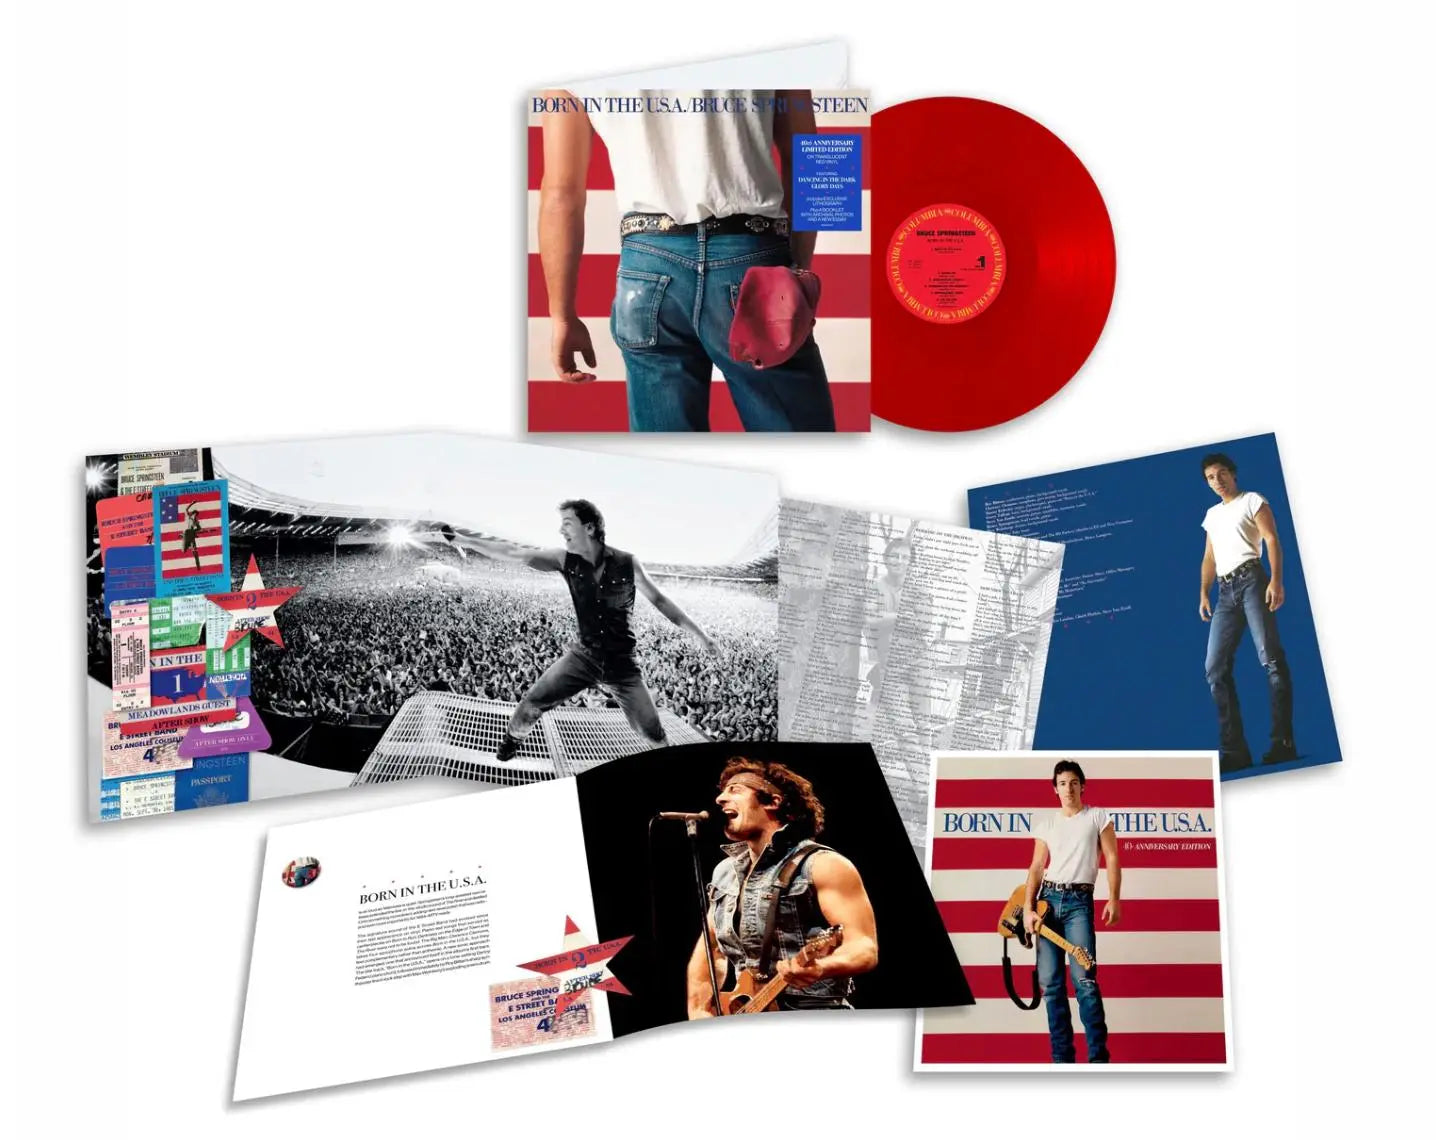 Bruce Springsteen - Born in the USA (40th Anniversary) [Red Vinyl]